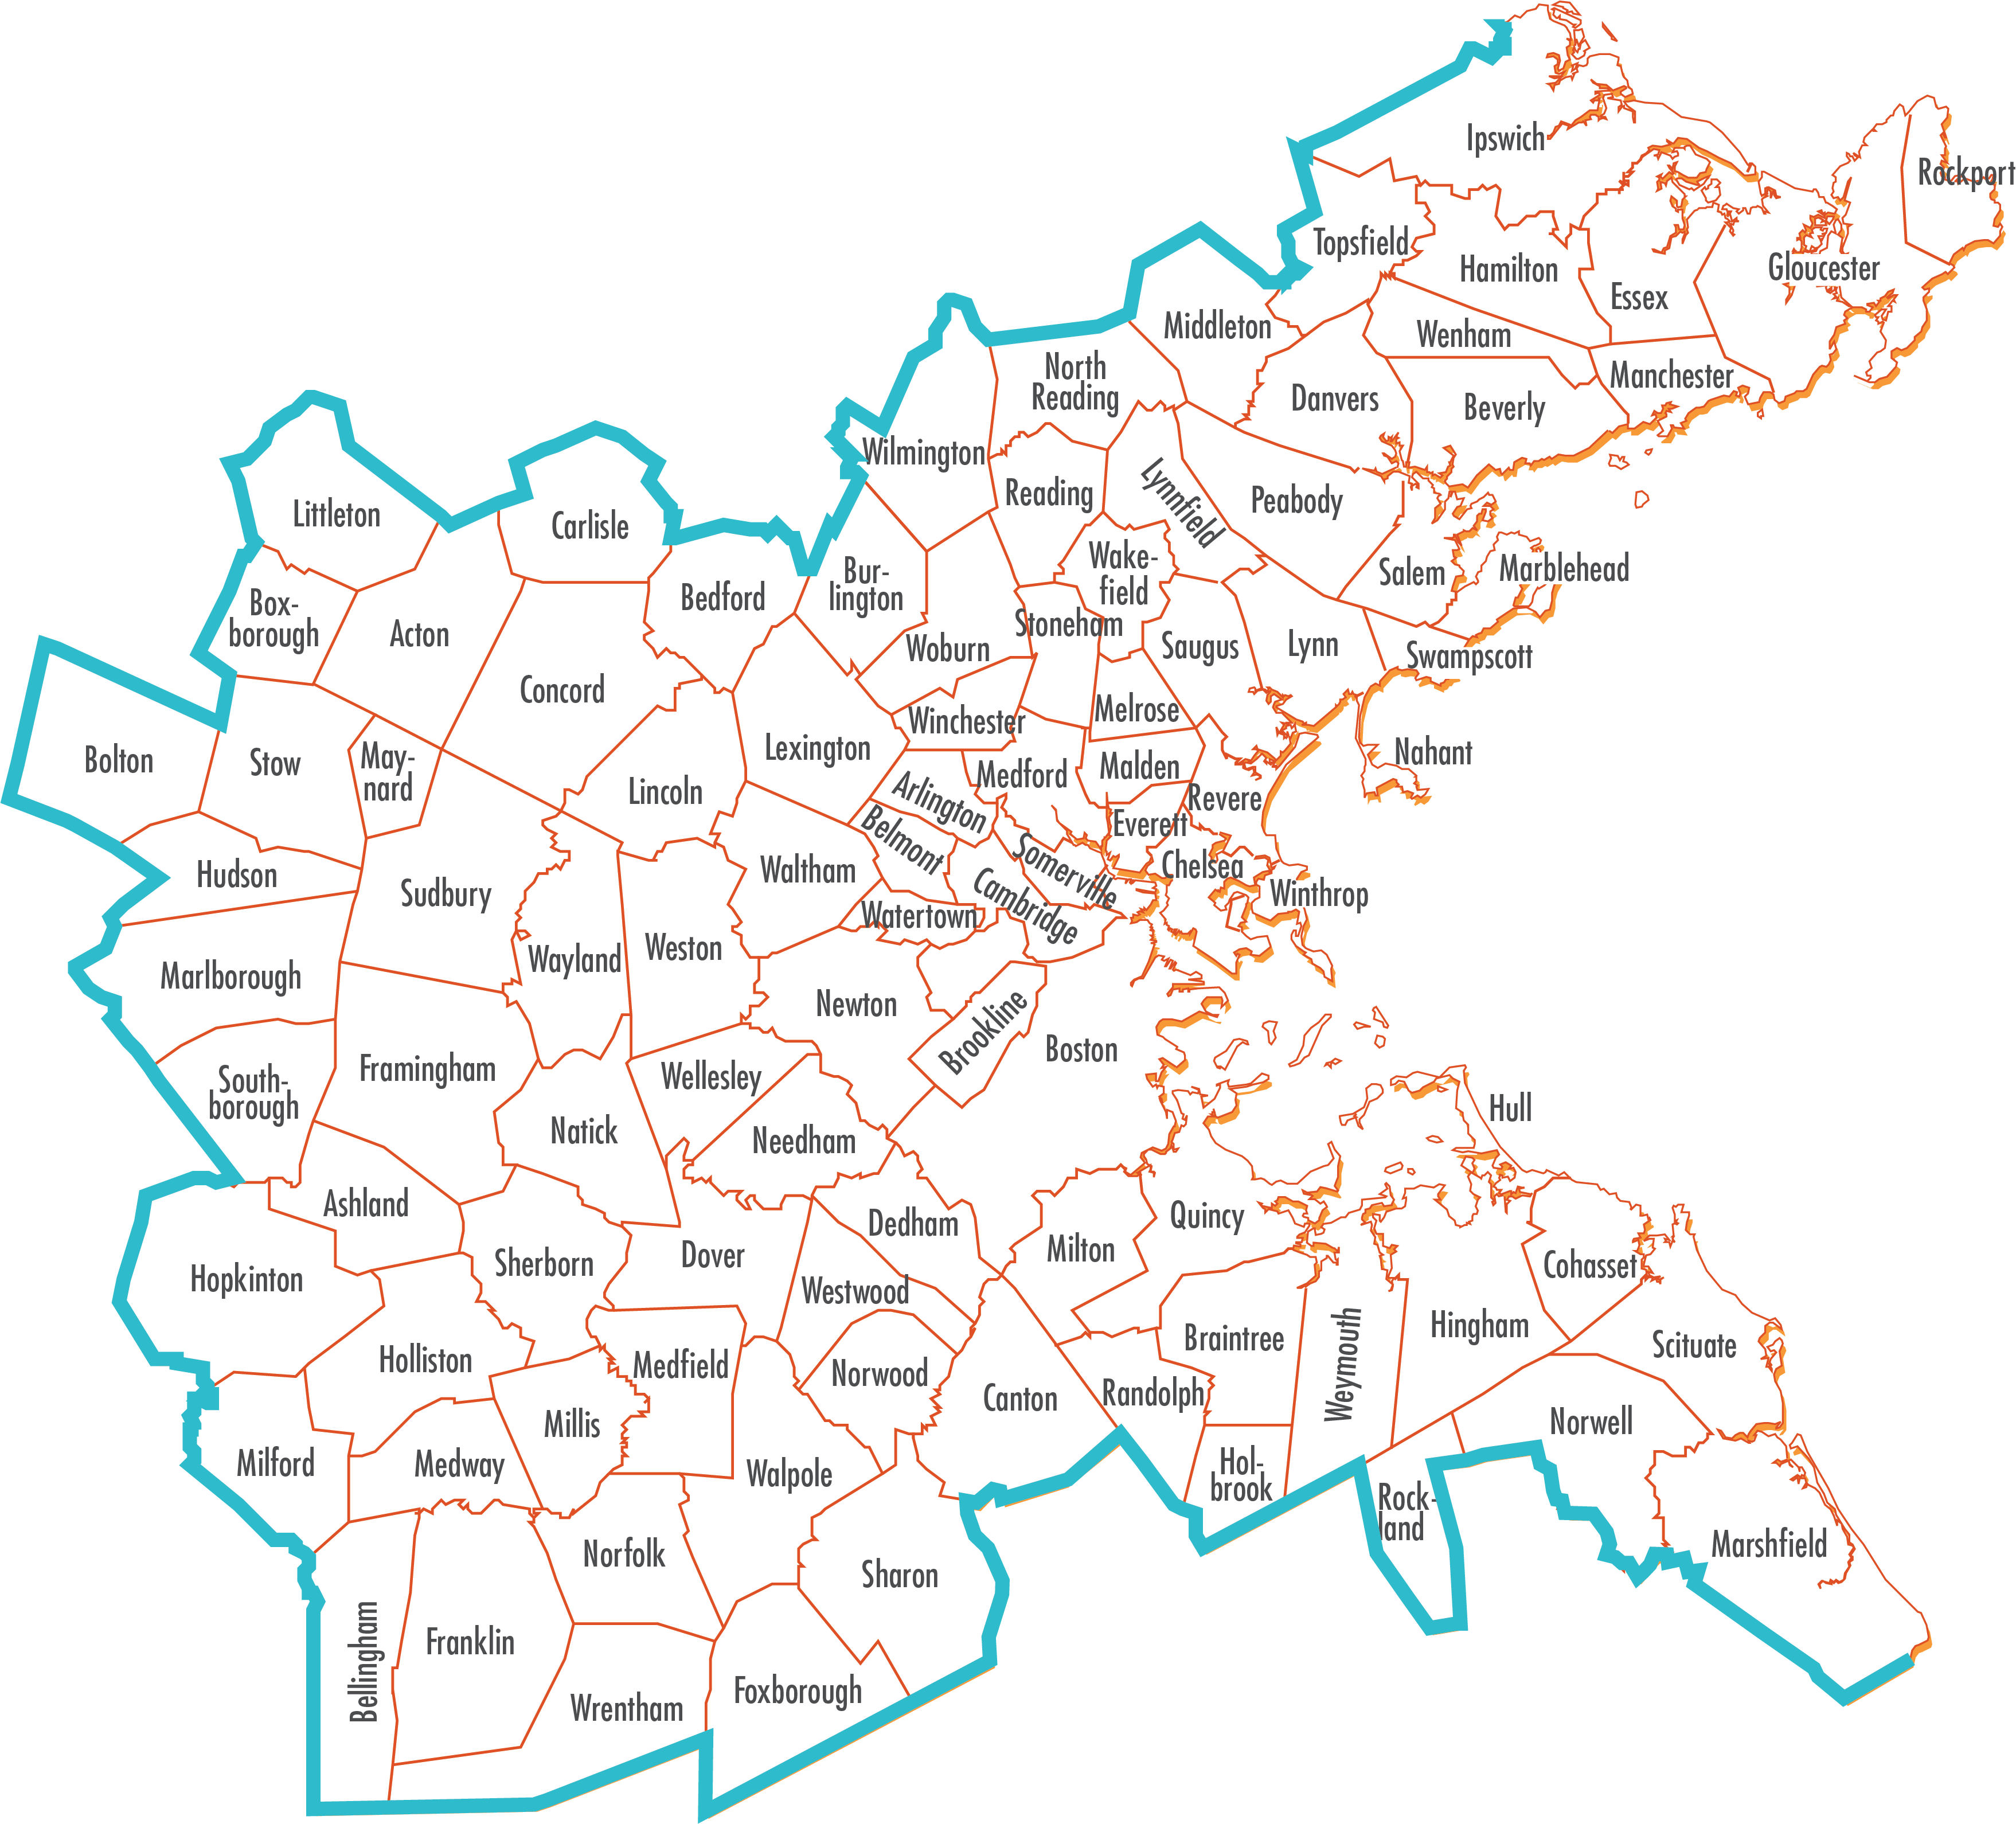 A map showing the municipalities that are within the MPO region.